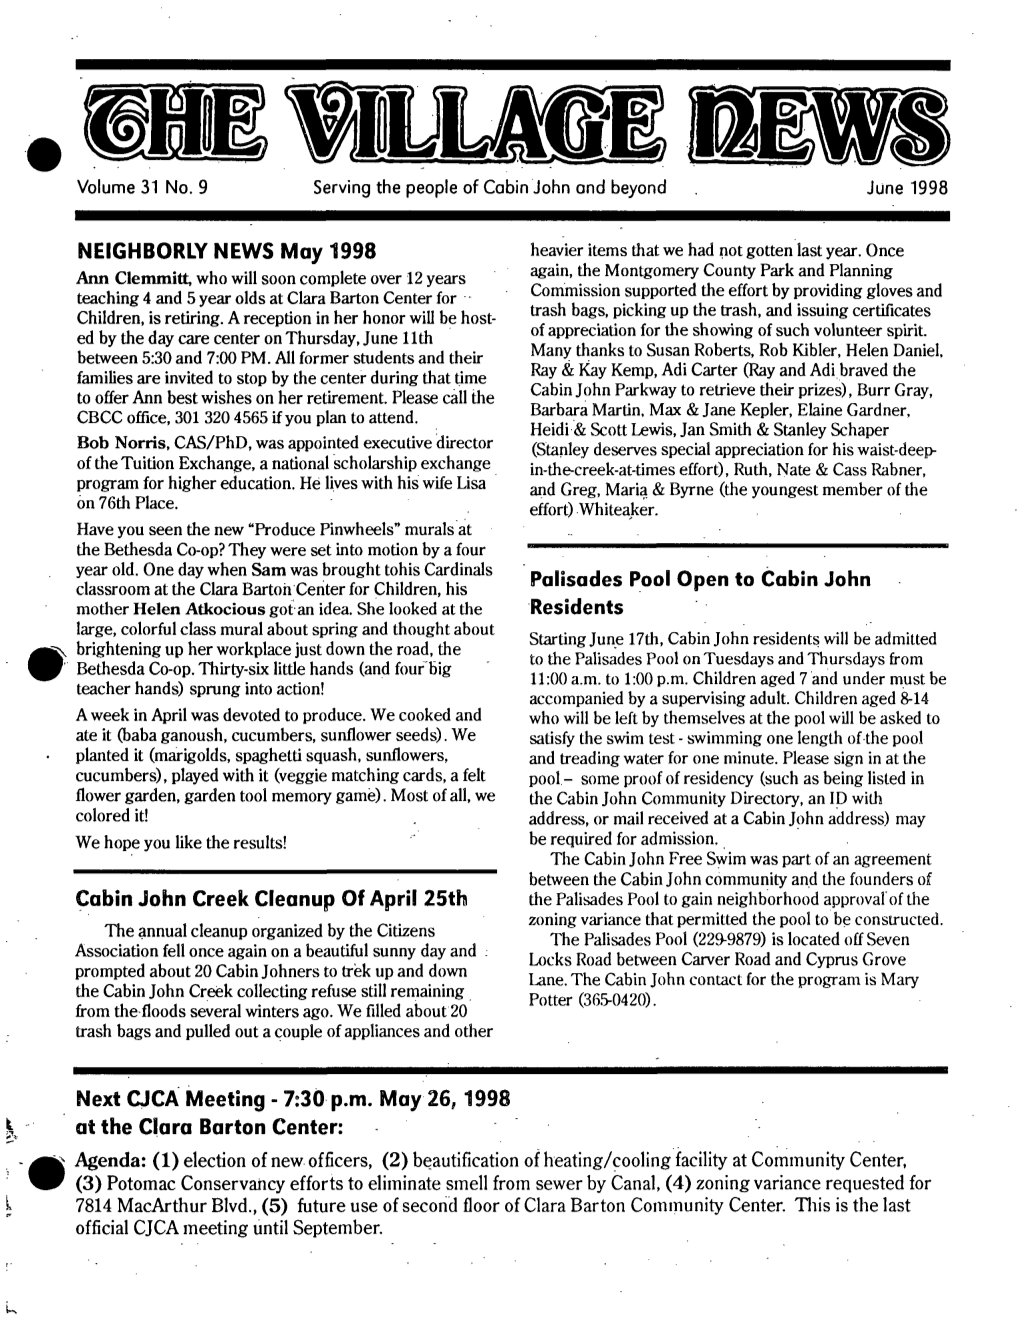 NEIGHBORLY NEWS May 1998 Cabin John Creek Cleanup of April